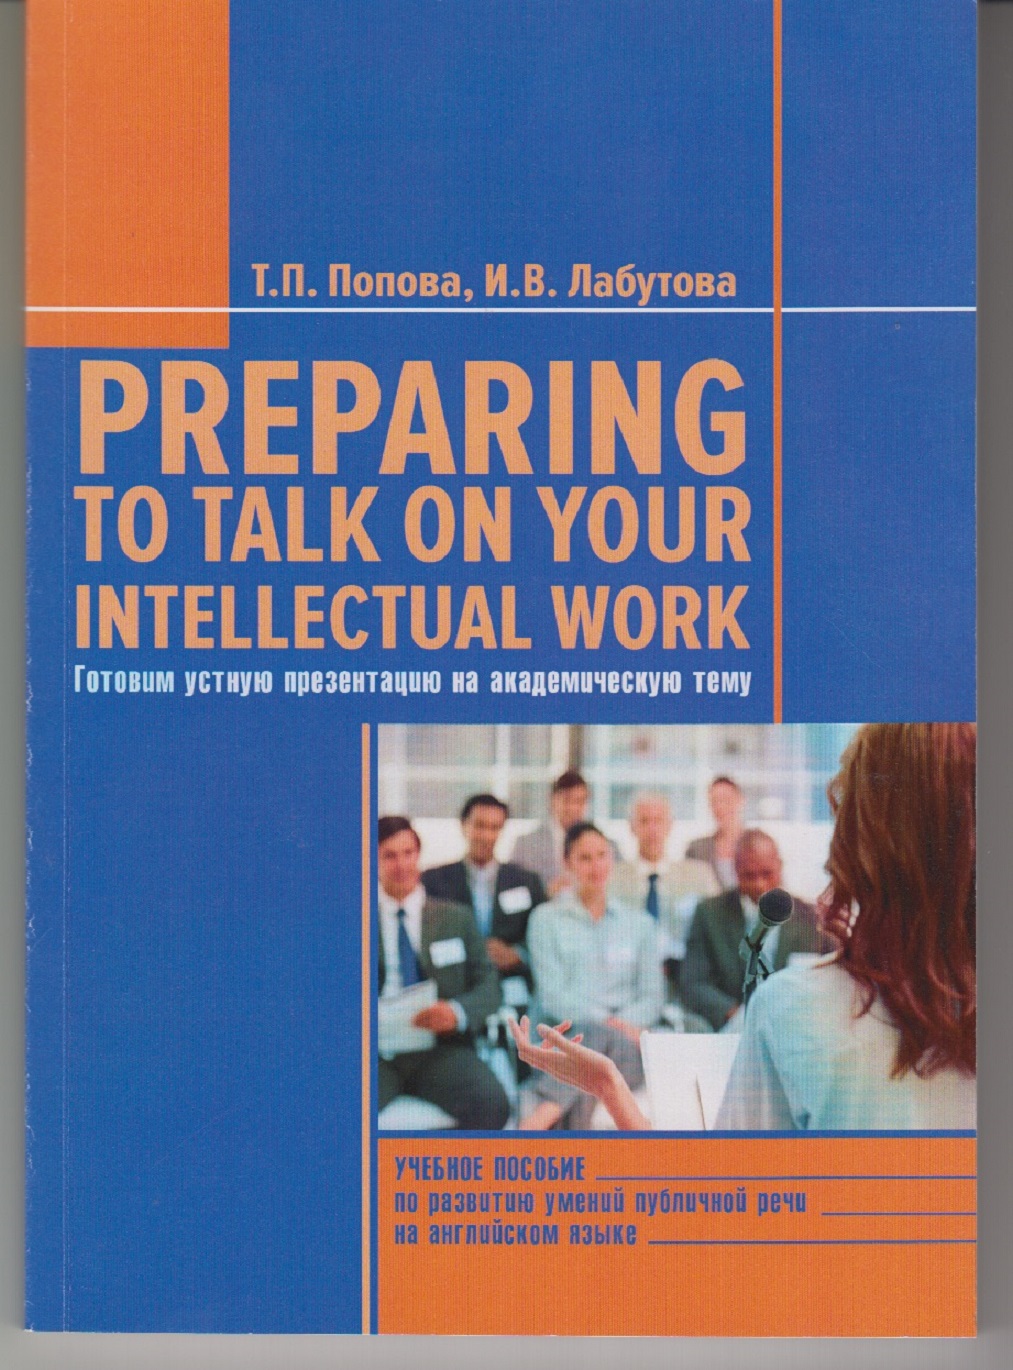 Preparing to talk on your intellectual work